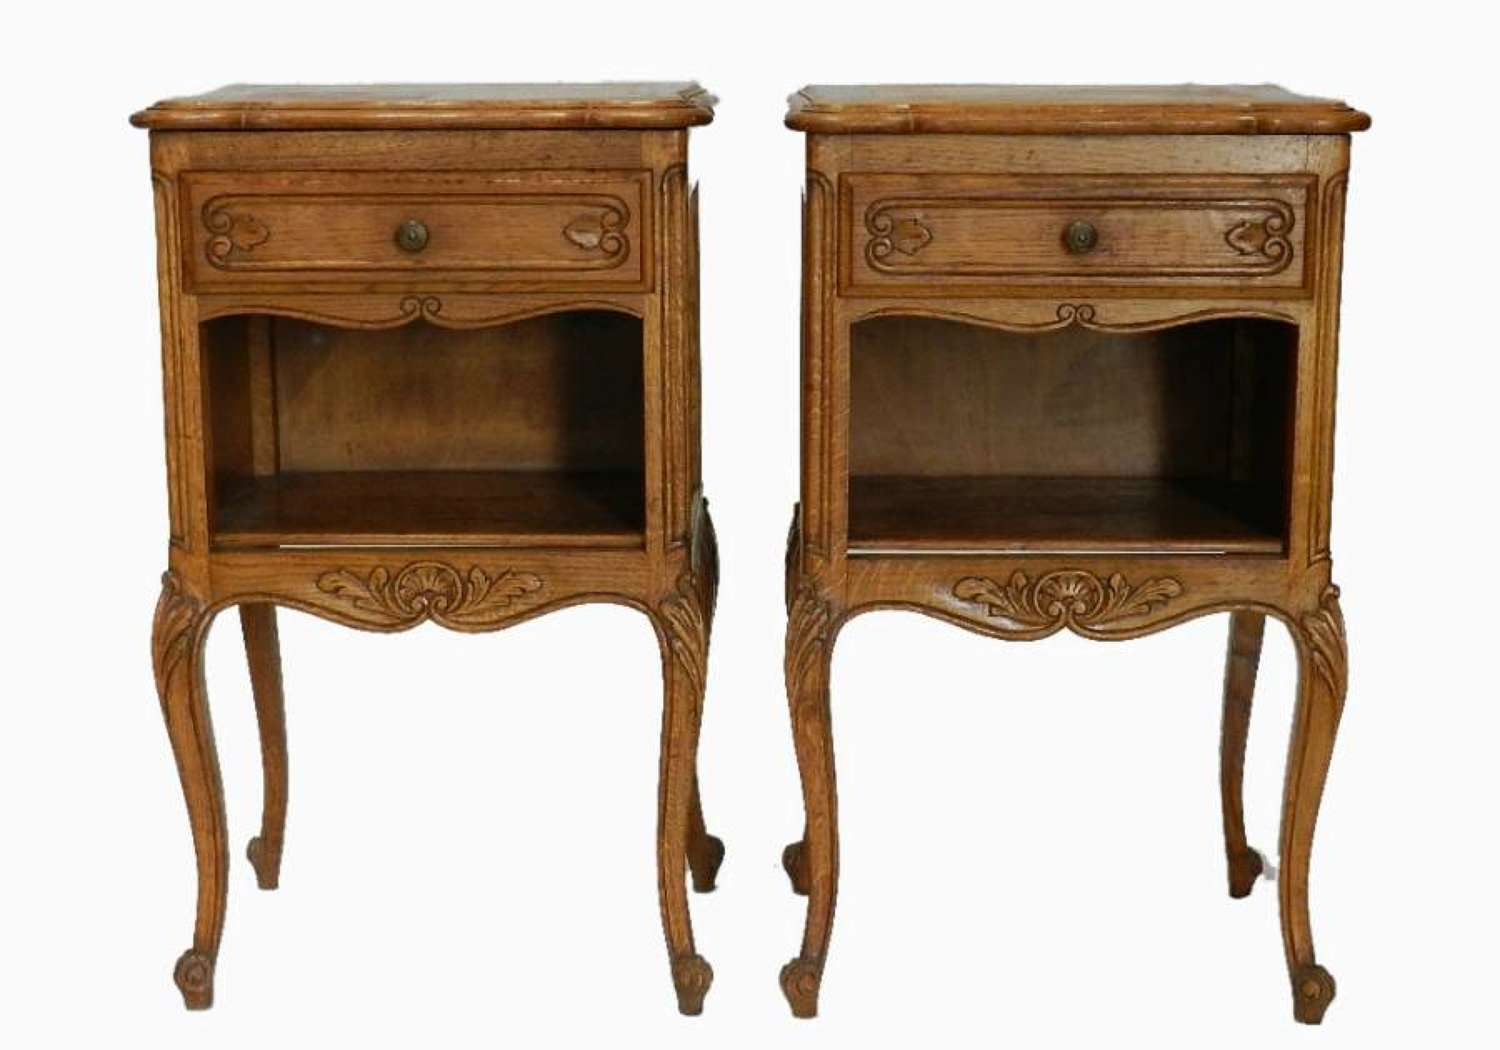 Pair of French Louis revival Bedside Tables Nightstand Cabinets